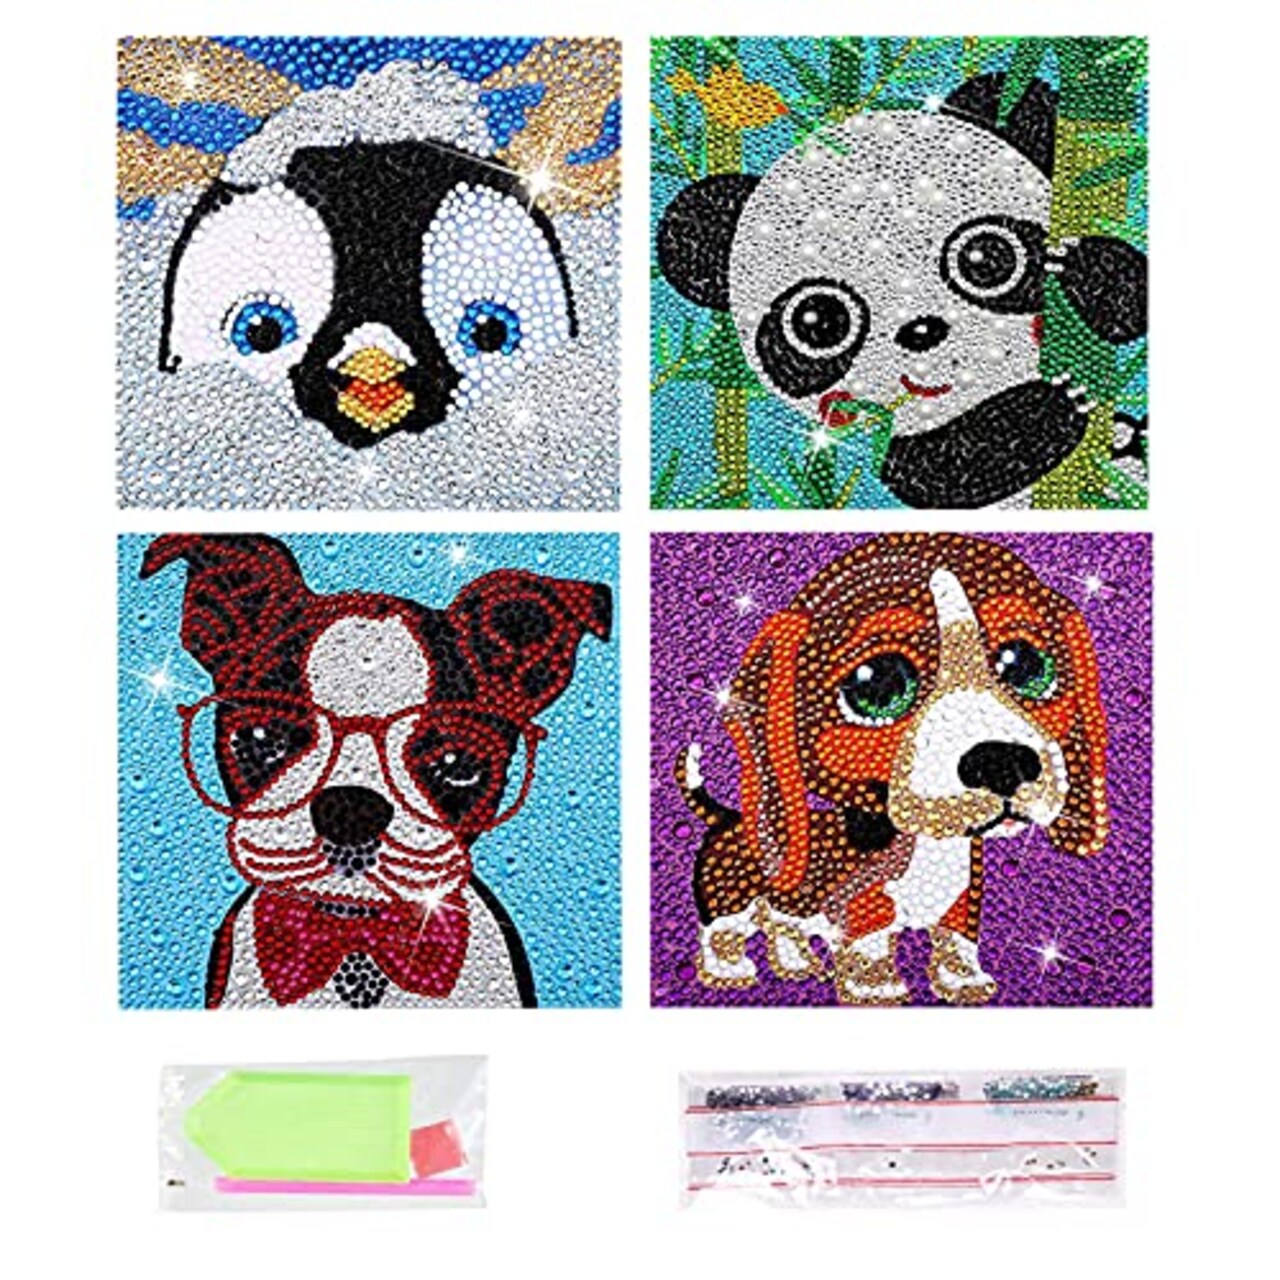 Diamond Painting Kits for Kids Animal 5D Diamond Gem Art by Number Dotz Kits  Art and Crafts for Kids Ages 6-8-10-12 Girls Boys for Birthday Christmas  Gifts (4Pcs)